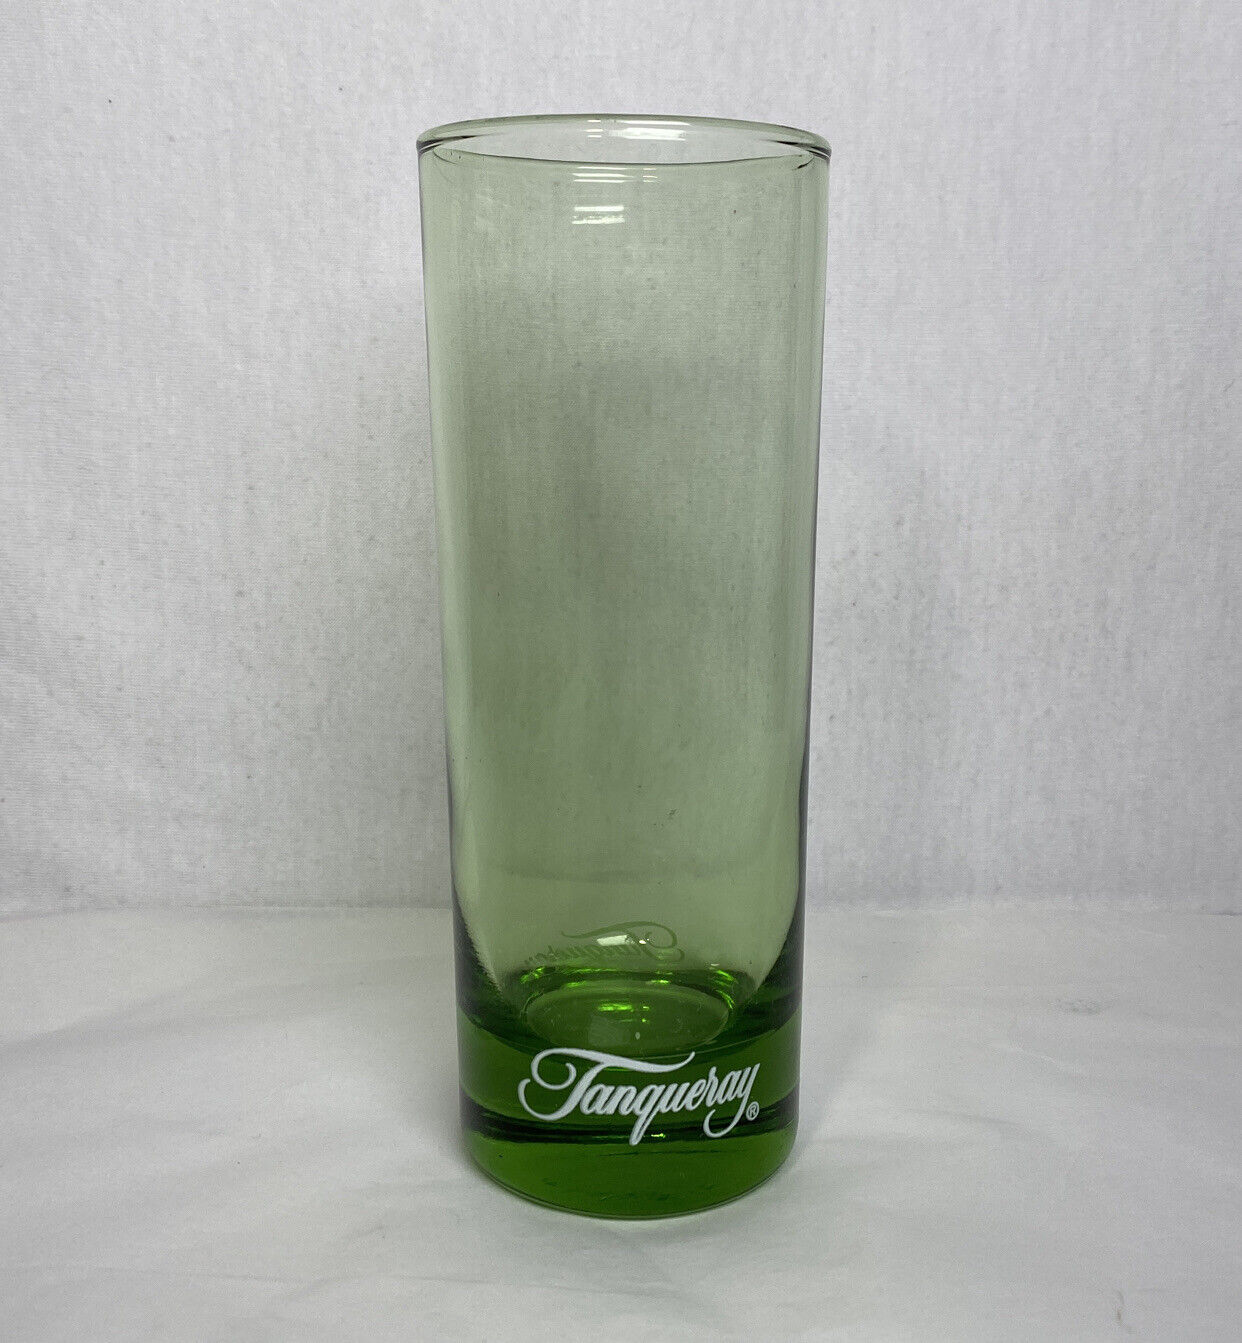 1 Vtg Tanqueray Highball Glass London Gin Drinking Green 6.25" Tall Replacement